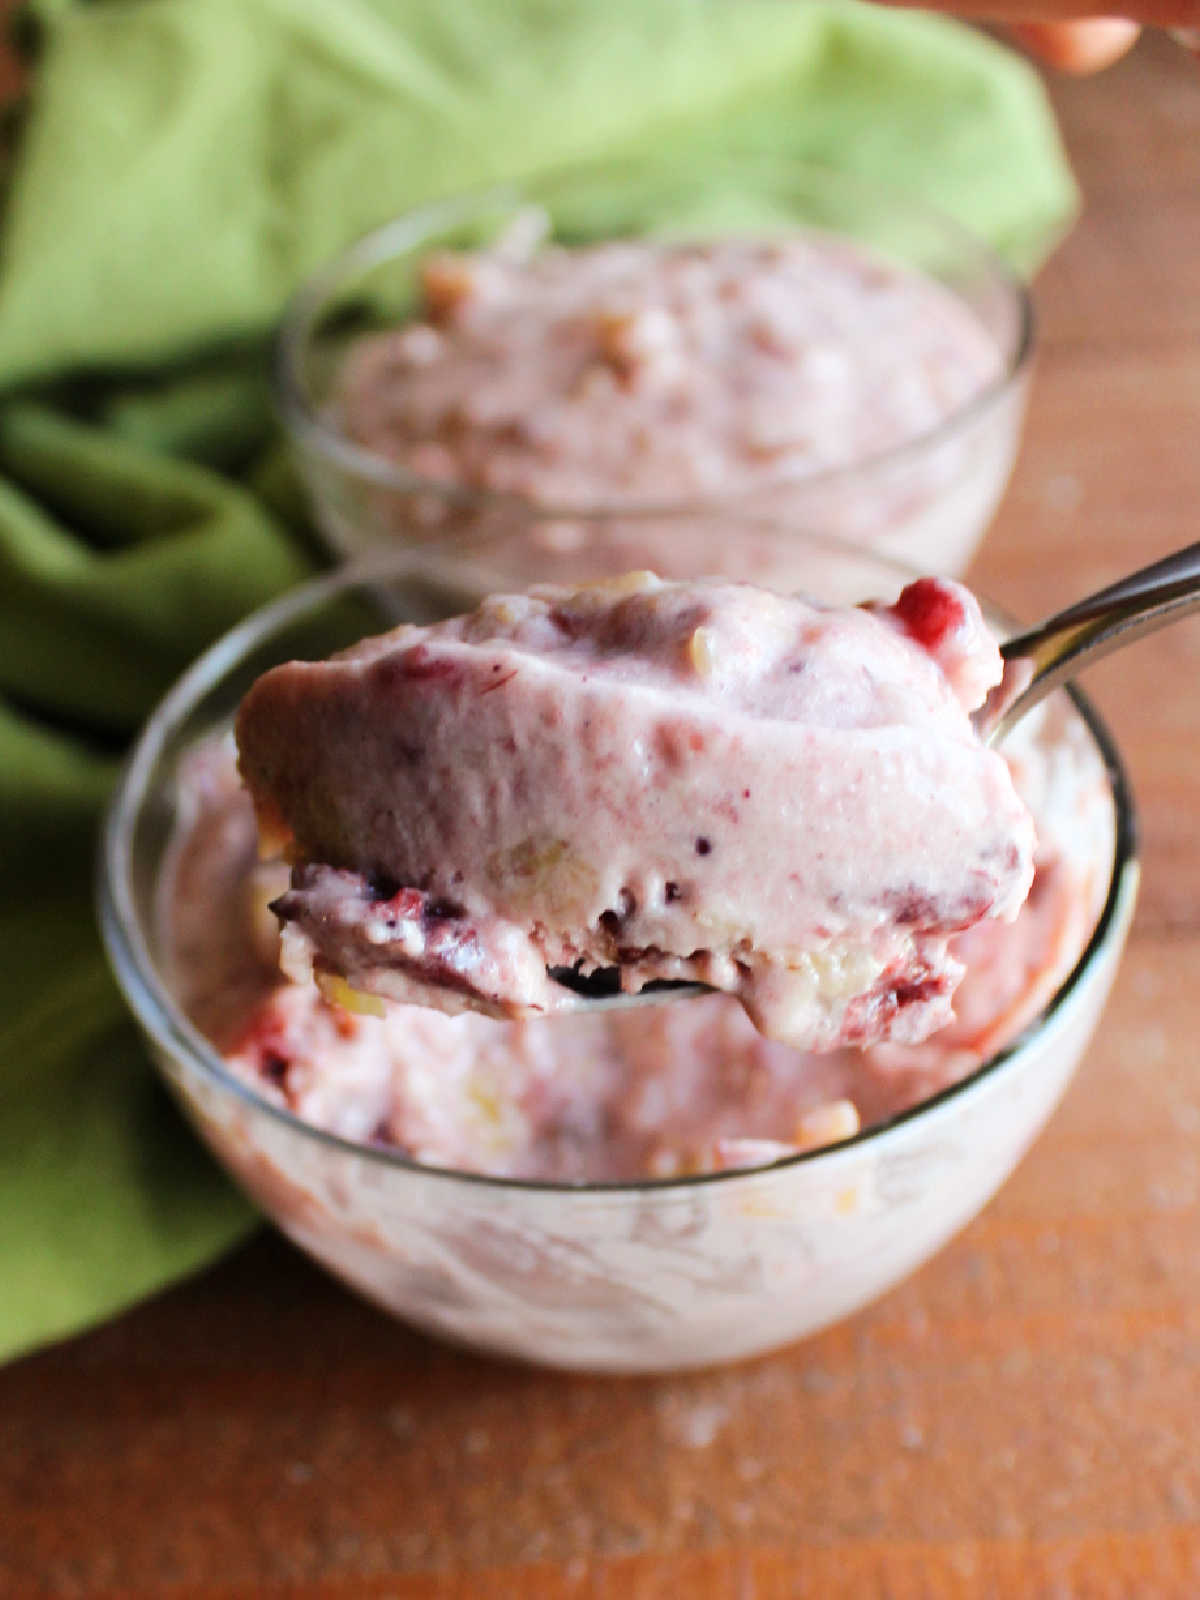 Spoonful of frozen cranberry pineapple salad showing creamy texture with small chunks.